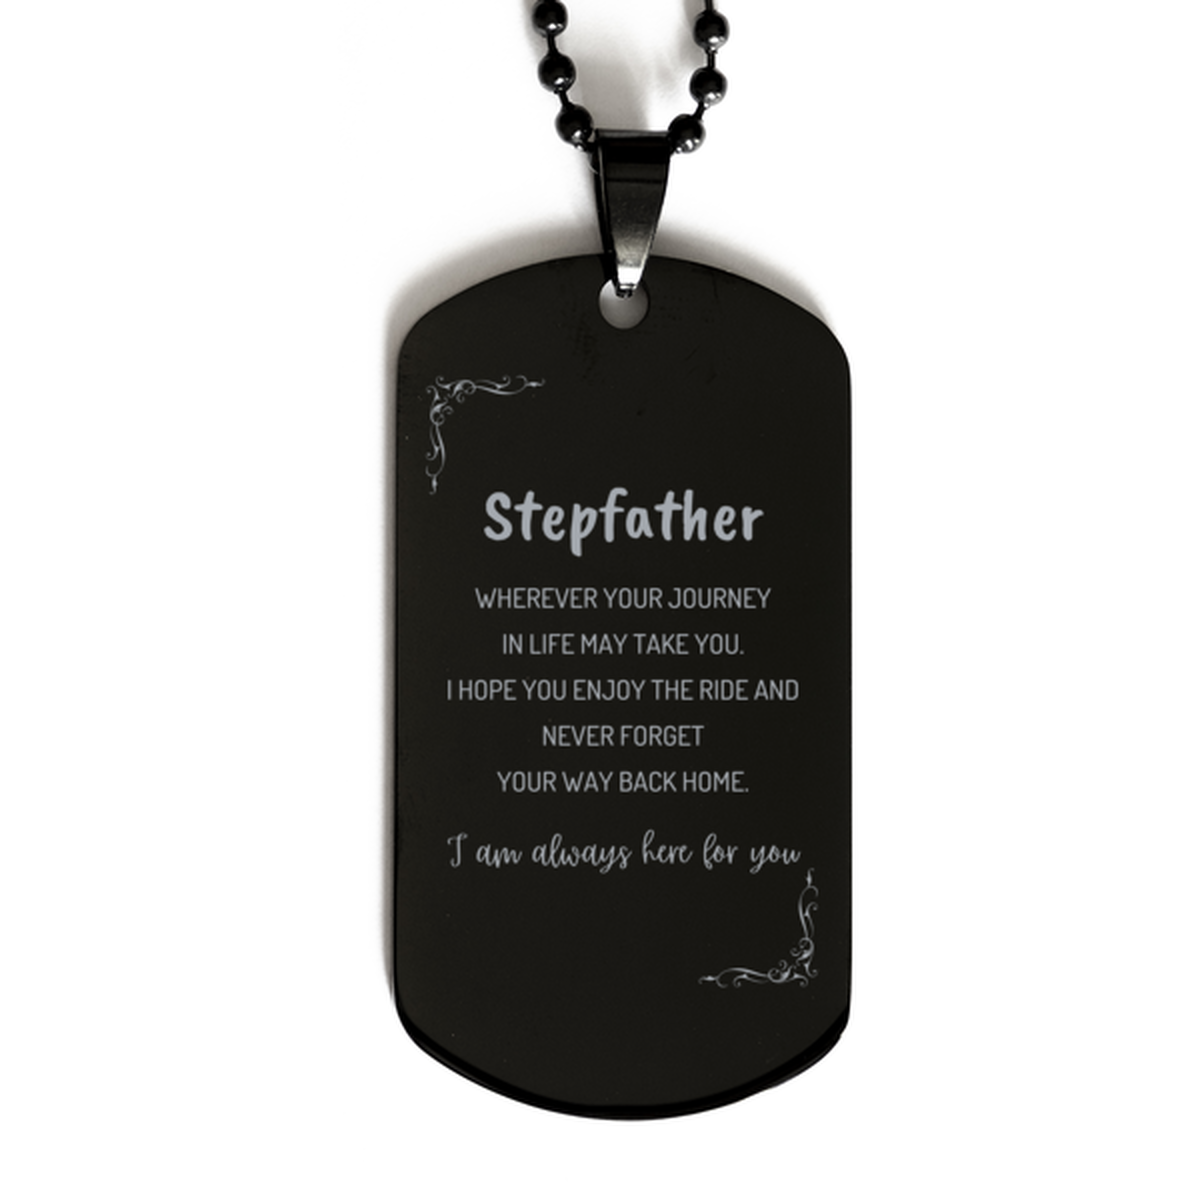 Stepfather wherever your journey in life may take you, I am always here for you Stepfather Black Dog Tag, Awesome Christmas Gifts For Stepfather, Stepfather Birthday Gifts for Men Women Family Loved One